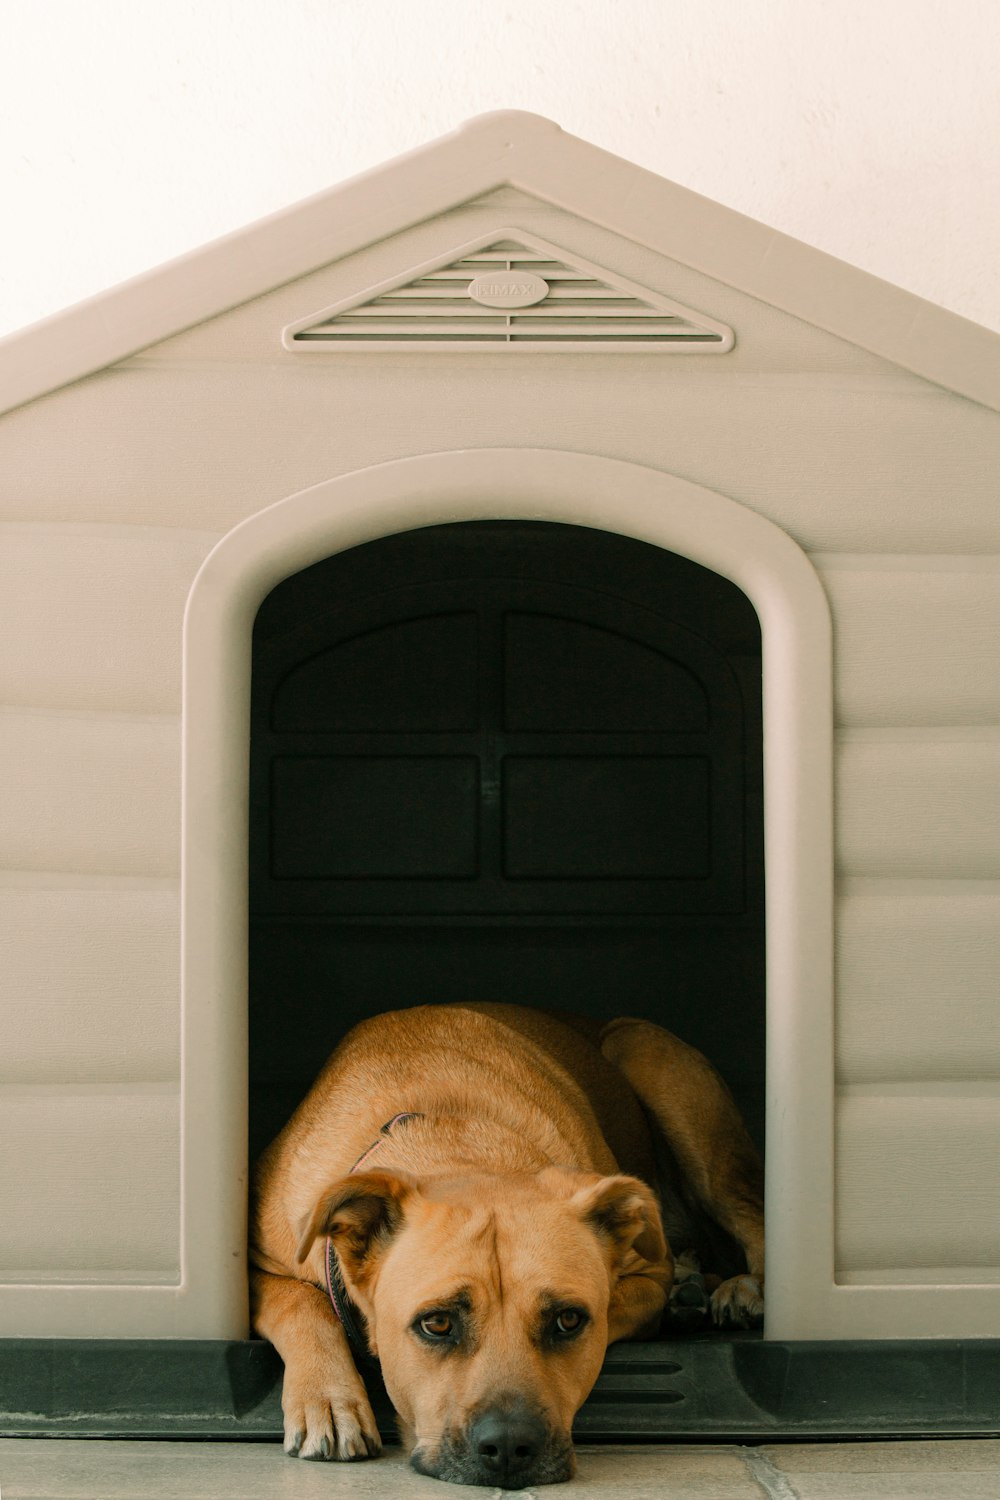 a large brown dog laying in a dog house